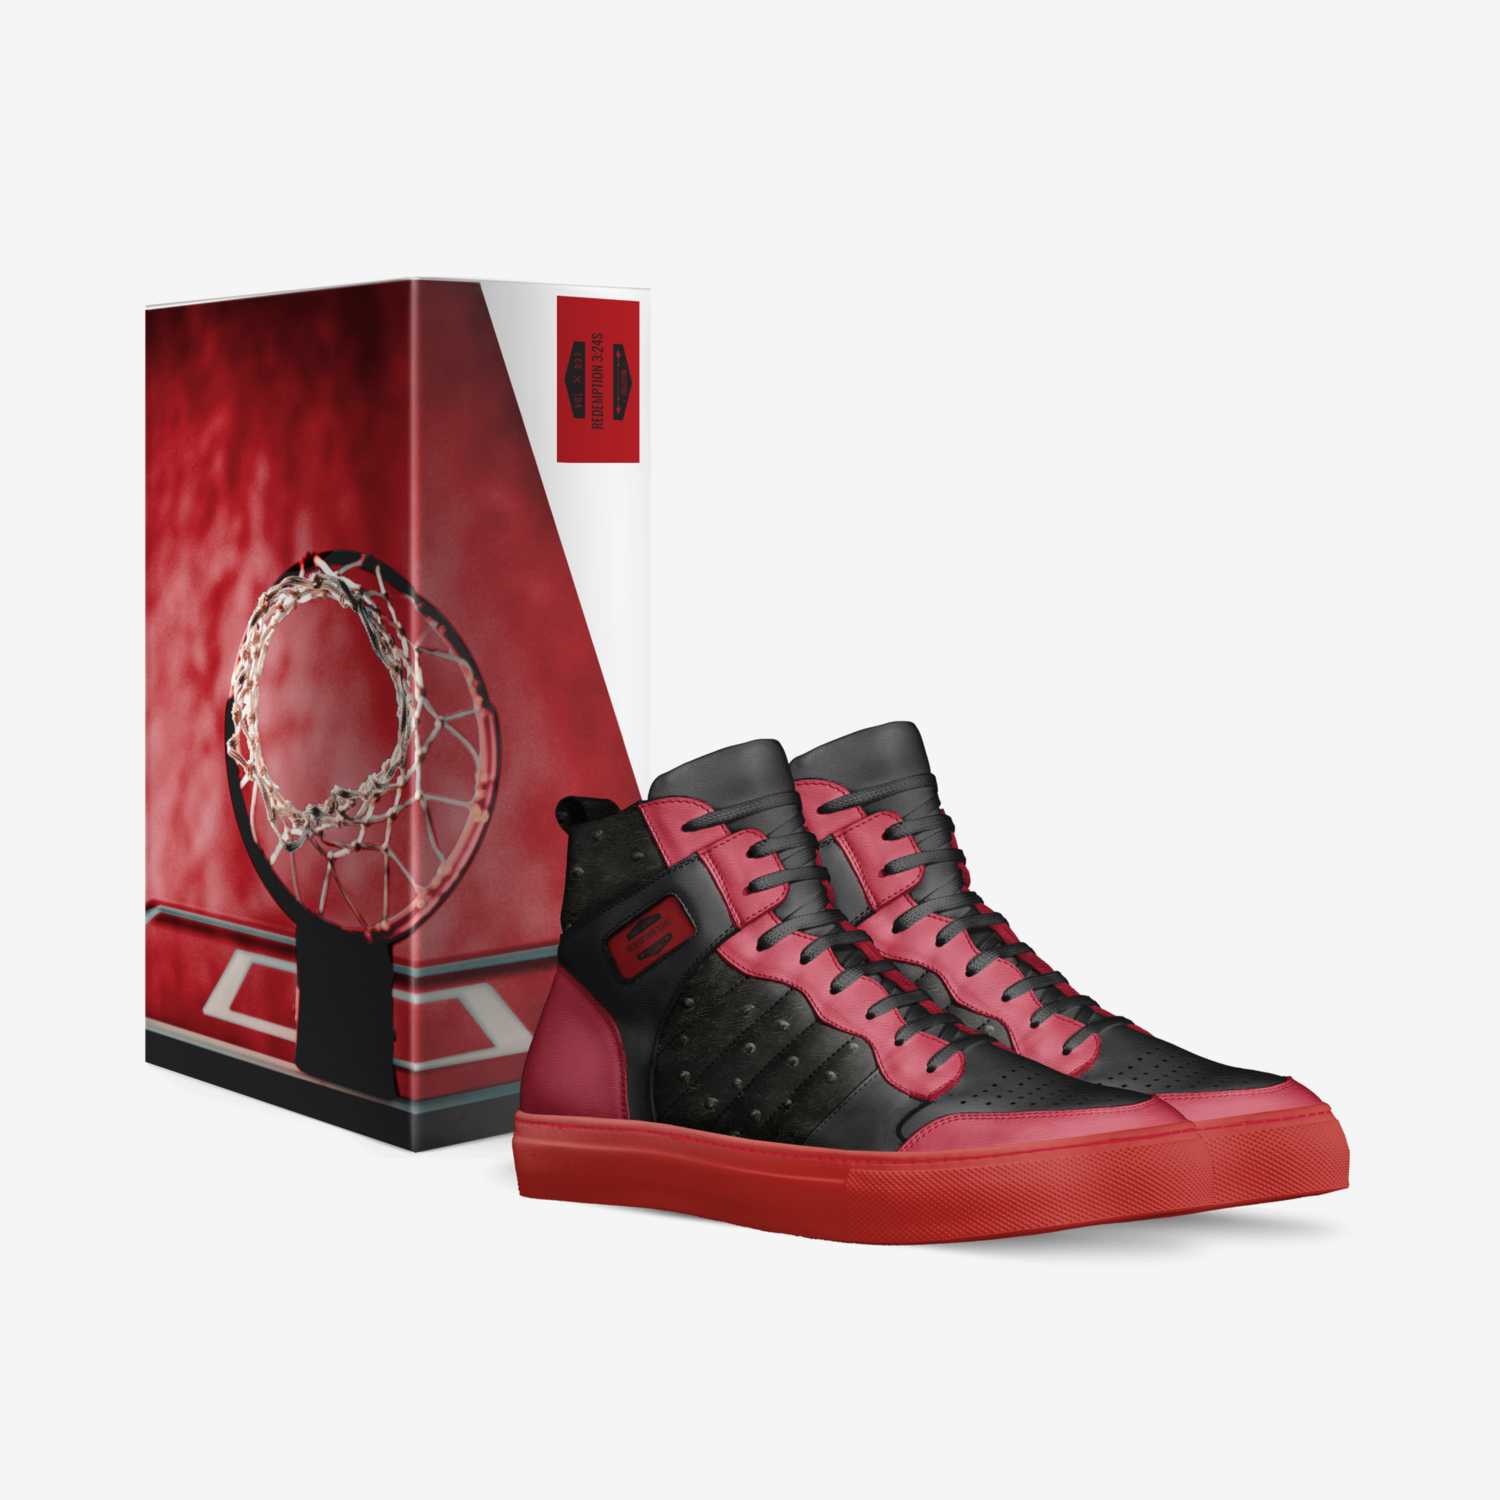 Redemption 3:24s custom made in Italy shoes by Tim Jones | Box view